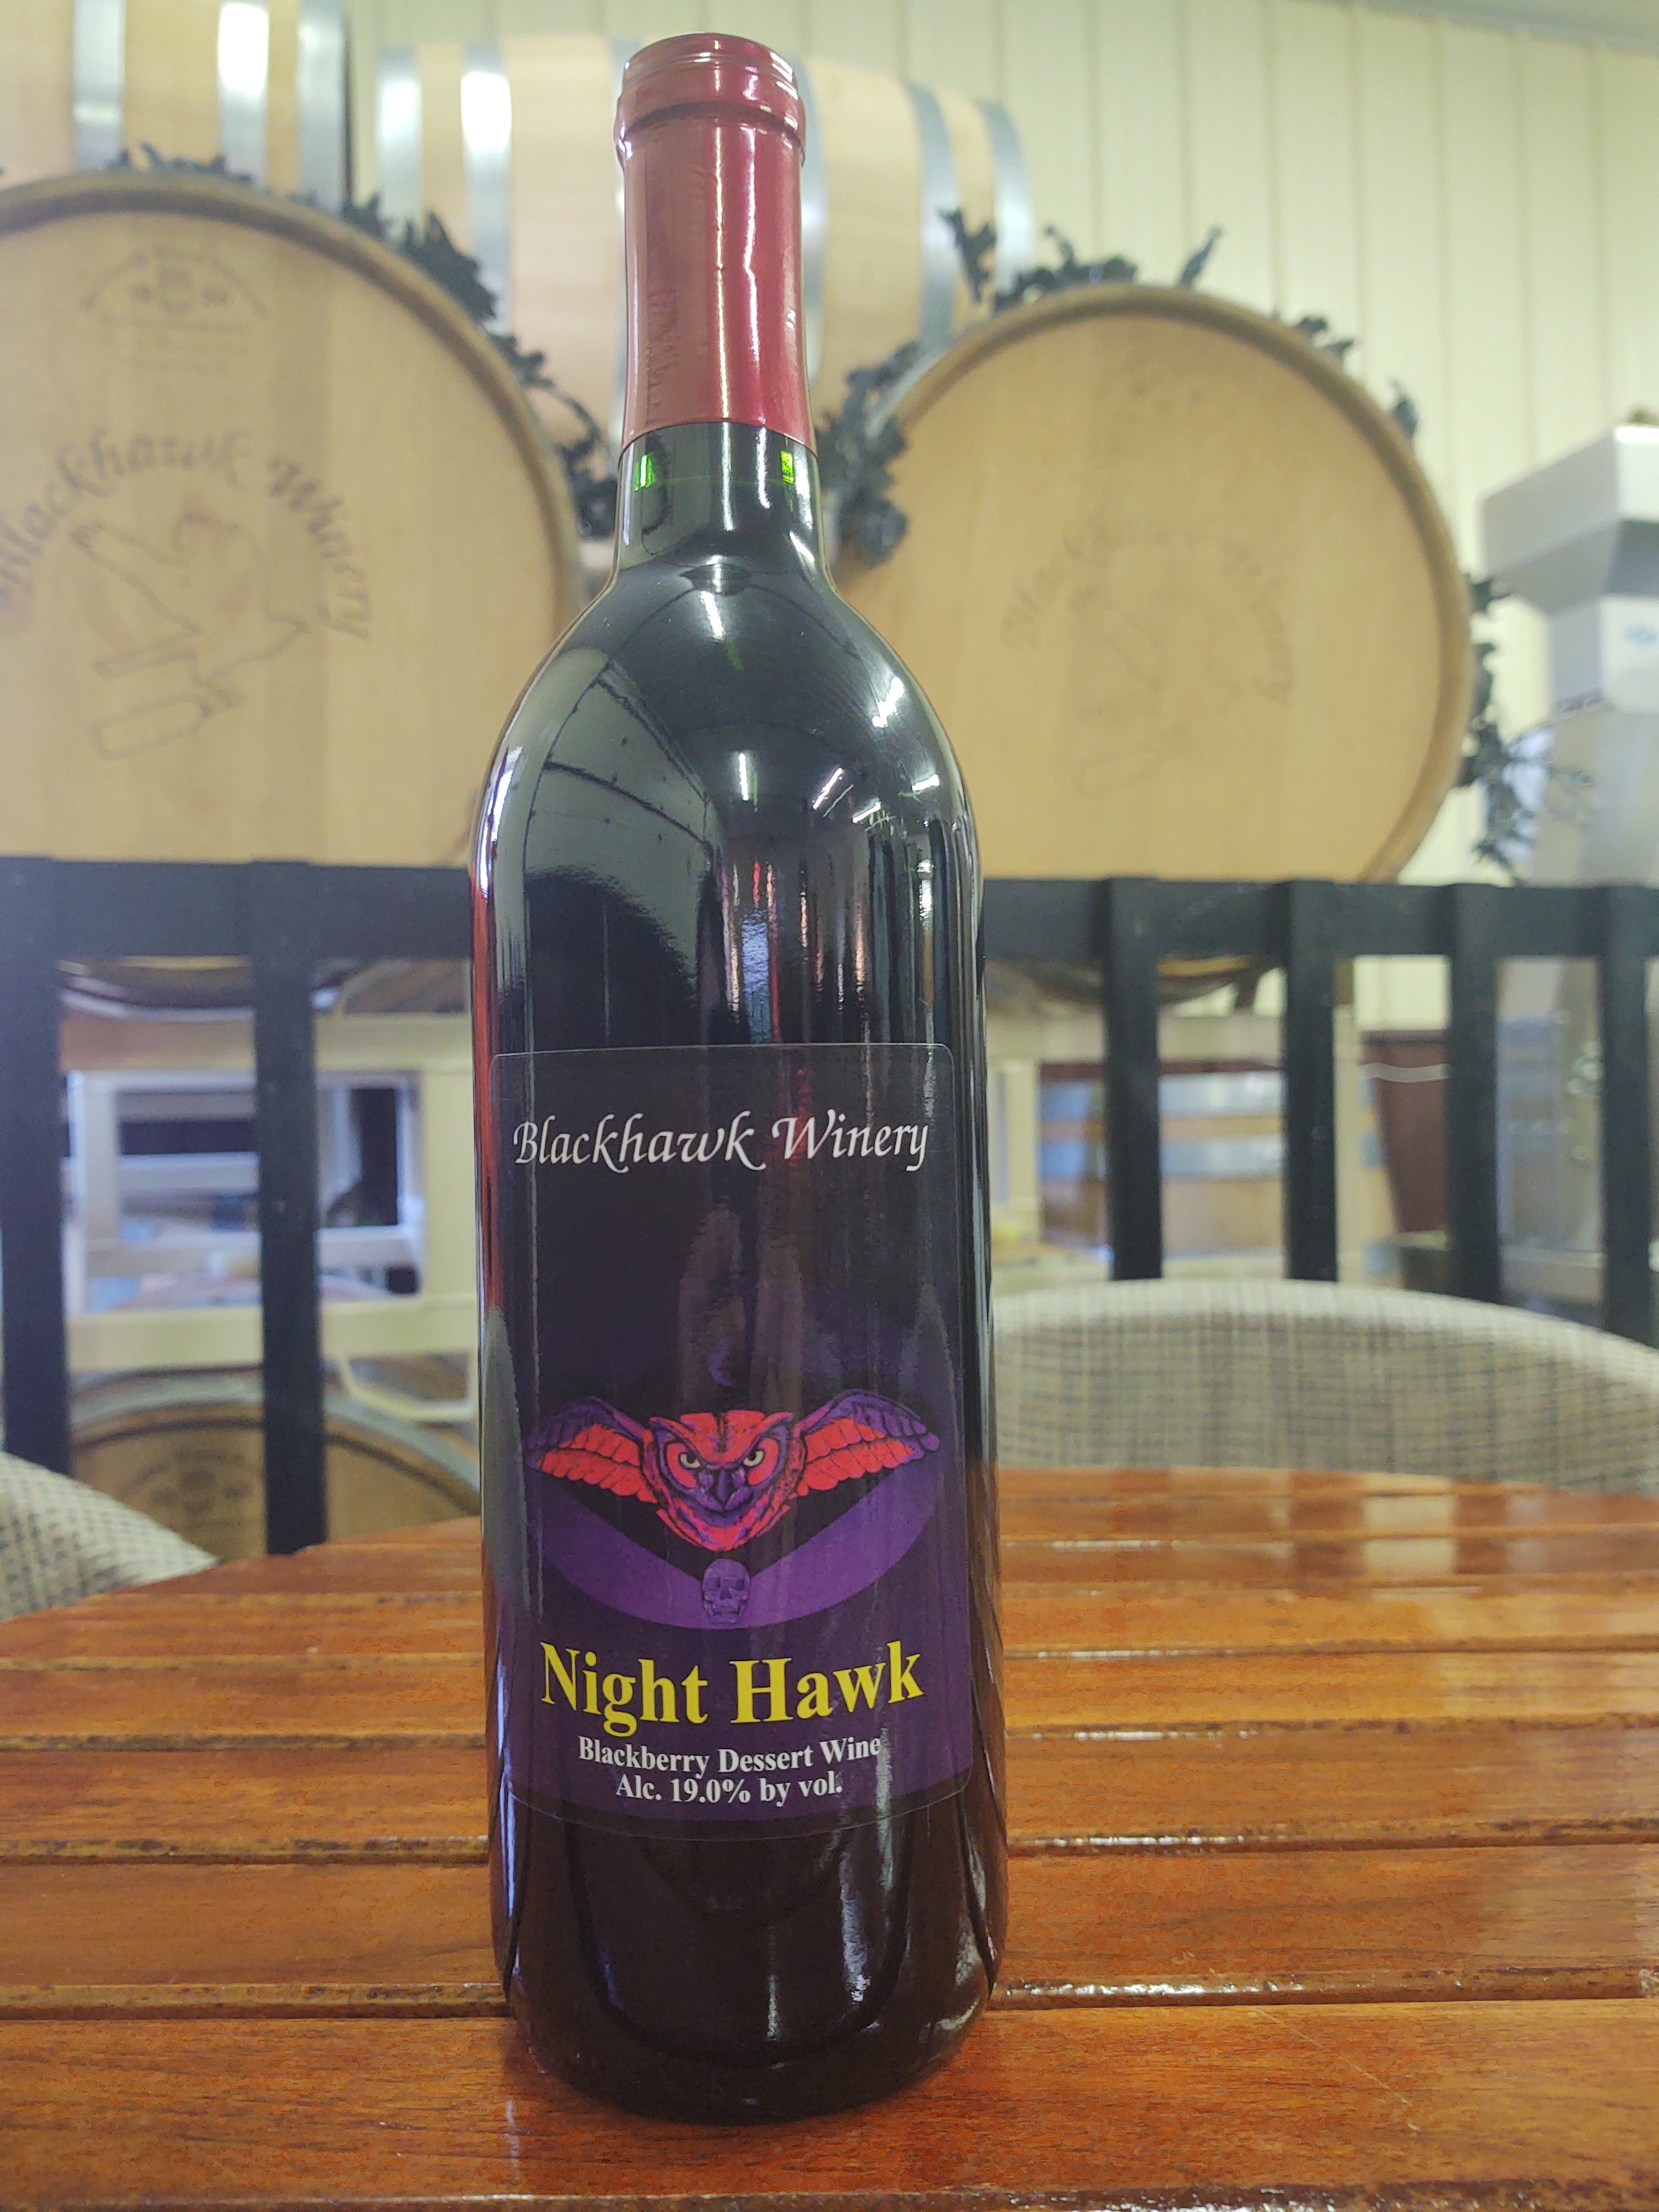 A bottle of Nighthawk Wine - A port style dessert wine made from blackberries. 750 ml bottle. Wine can only be shipped to the following states: AK, AZ, CO, DC, FL, GA, HI, IA, ID, IL, IN, KS, LA, MA, MD, ME, MN, MO, NC, ND, NE, NH, NM, NV, NY, OH, OR, PA, SC, TN, TX, VA, VT, WA, WI, WV, WY